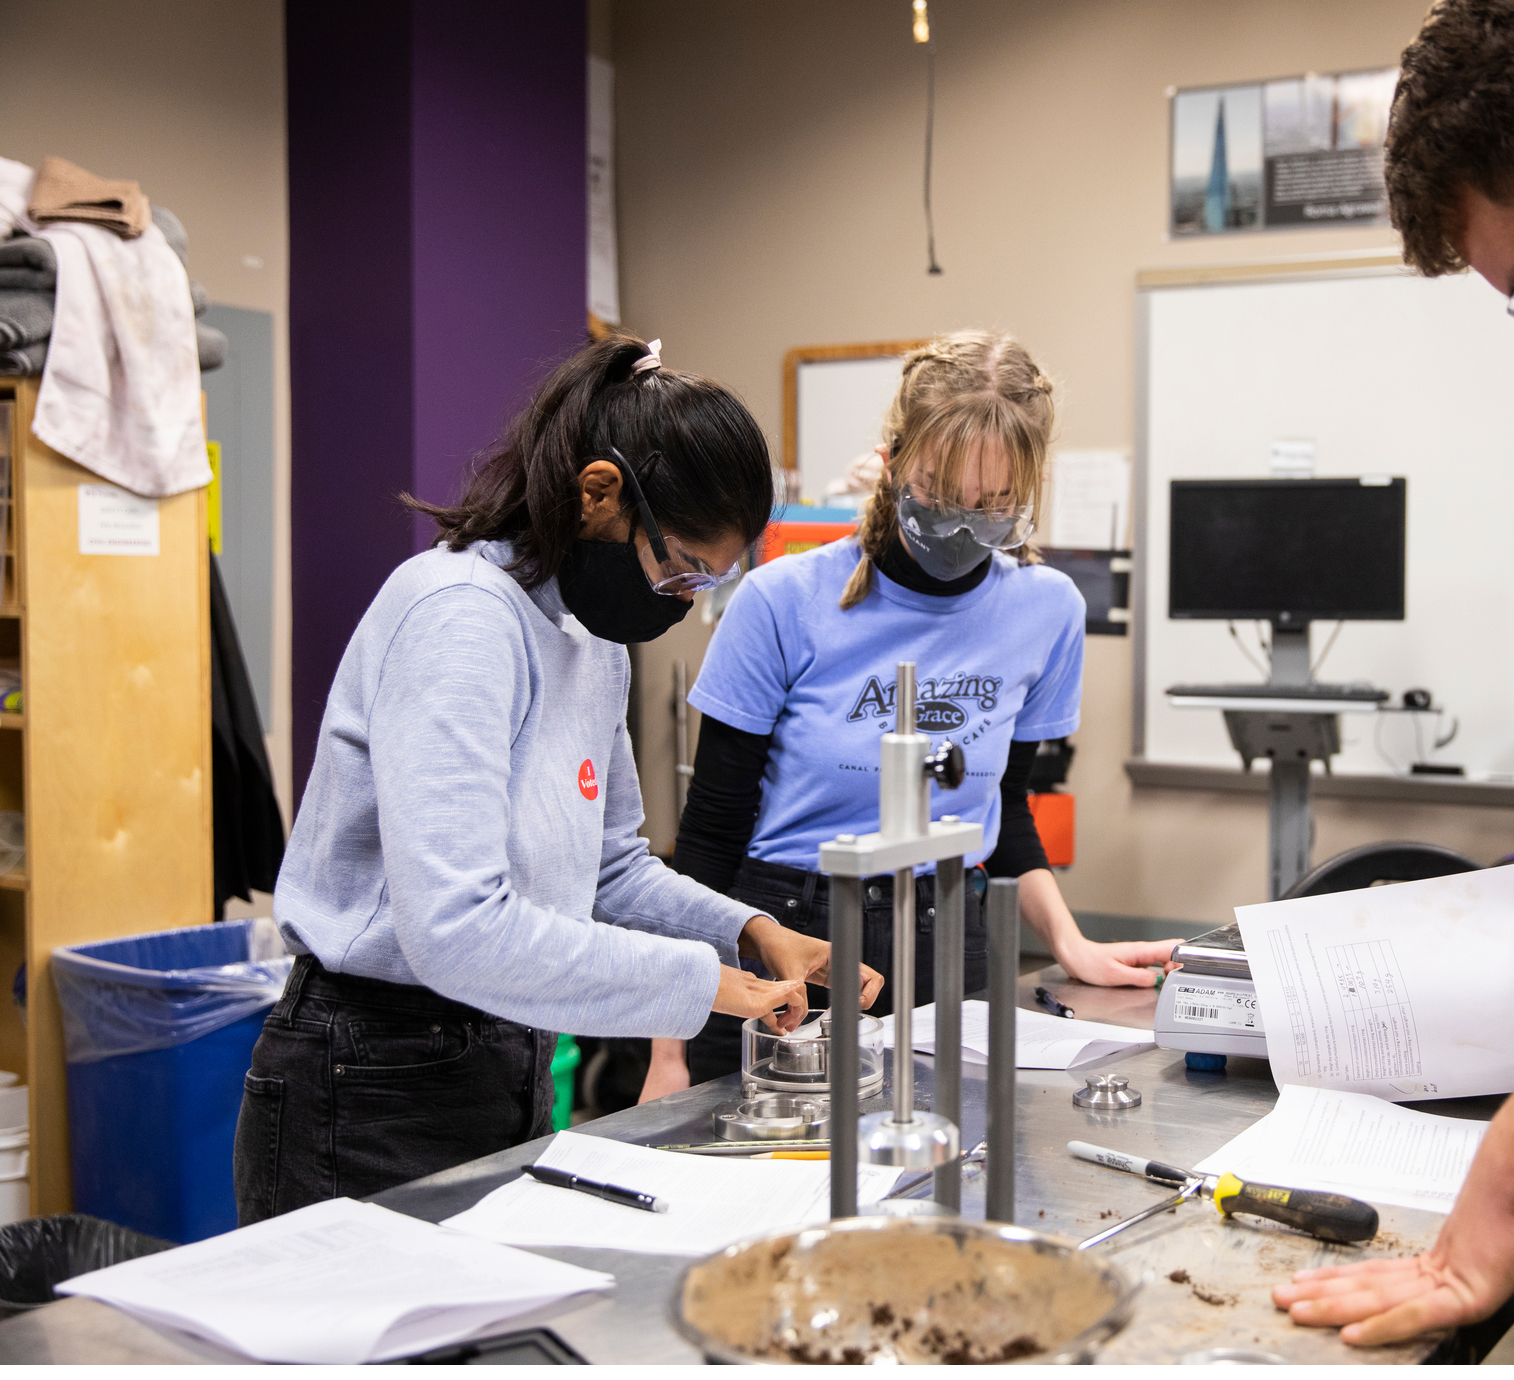 Students work together in a lab setting